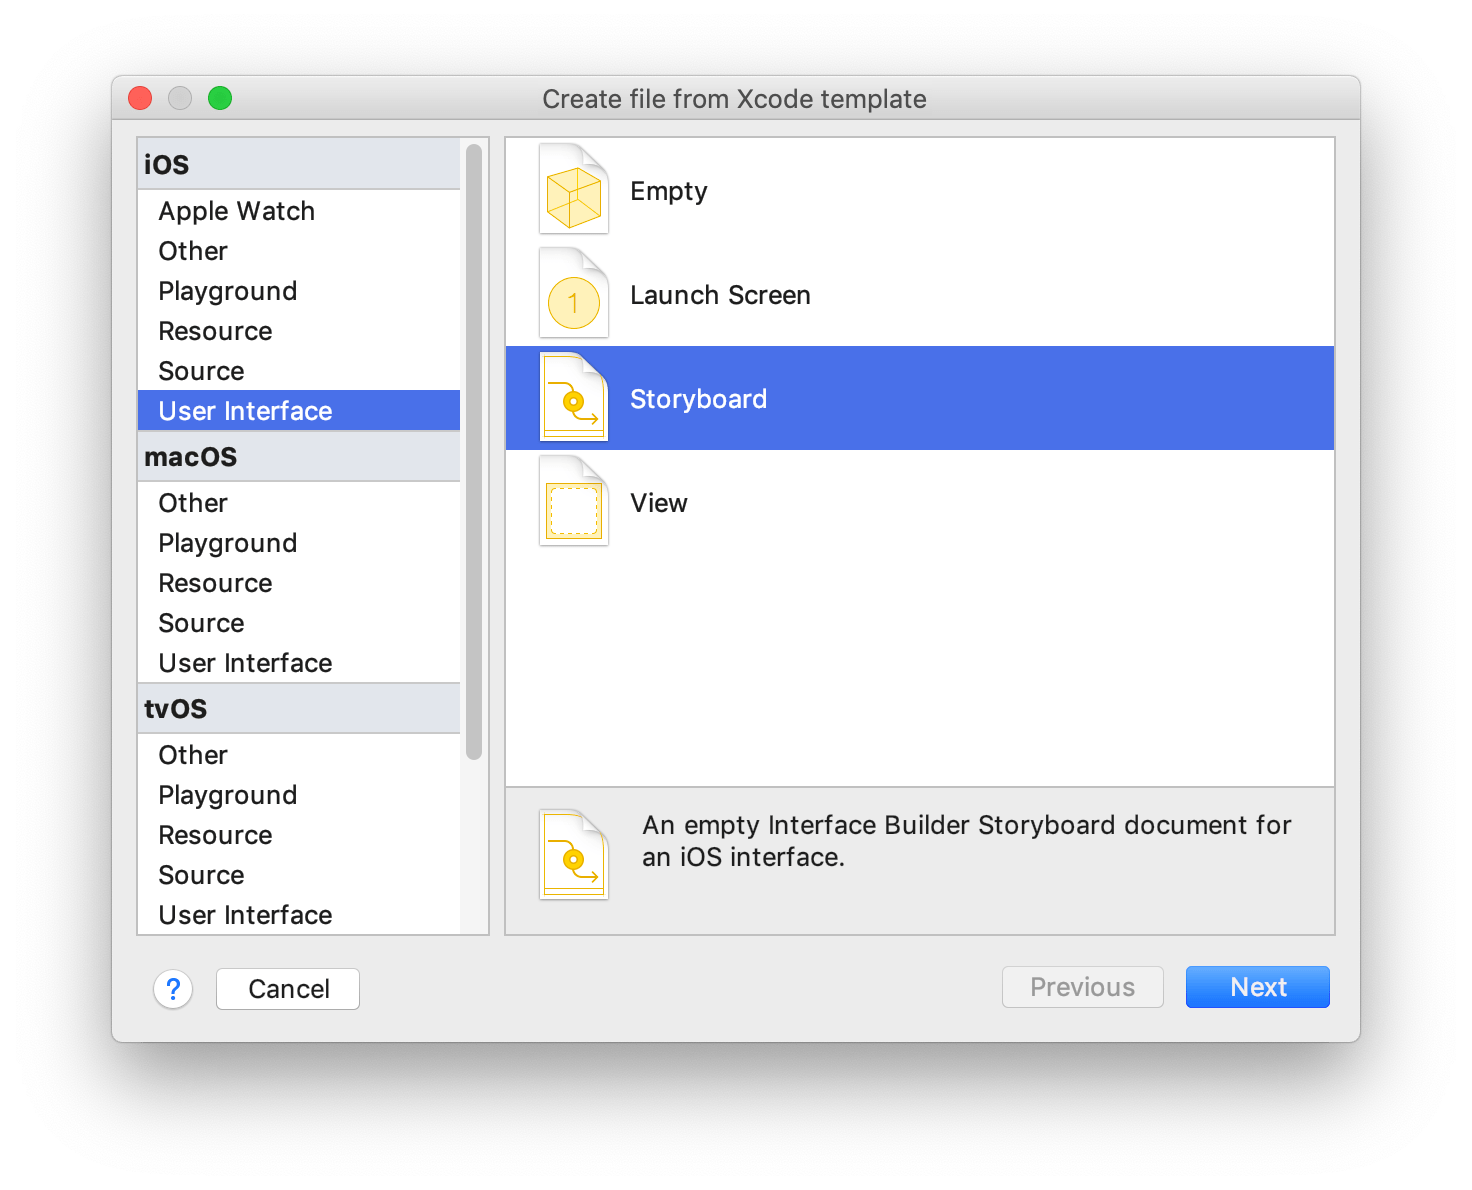 Create file from Xcode template: Step 1